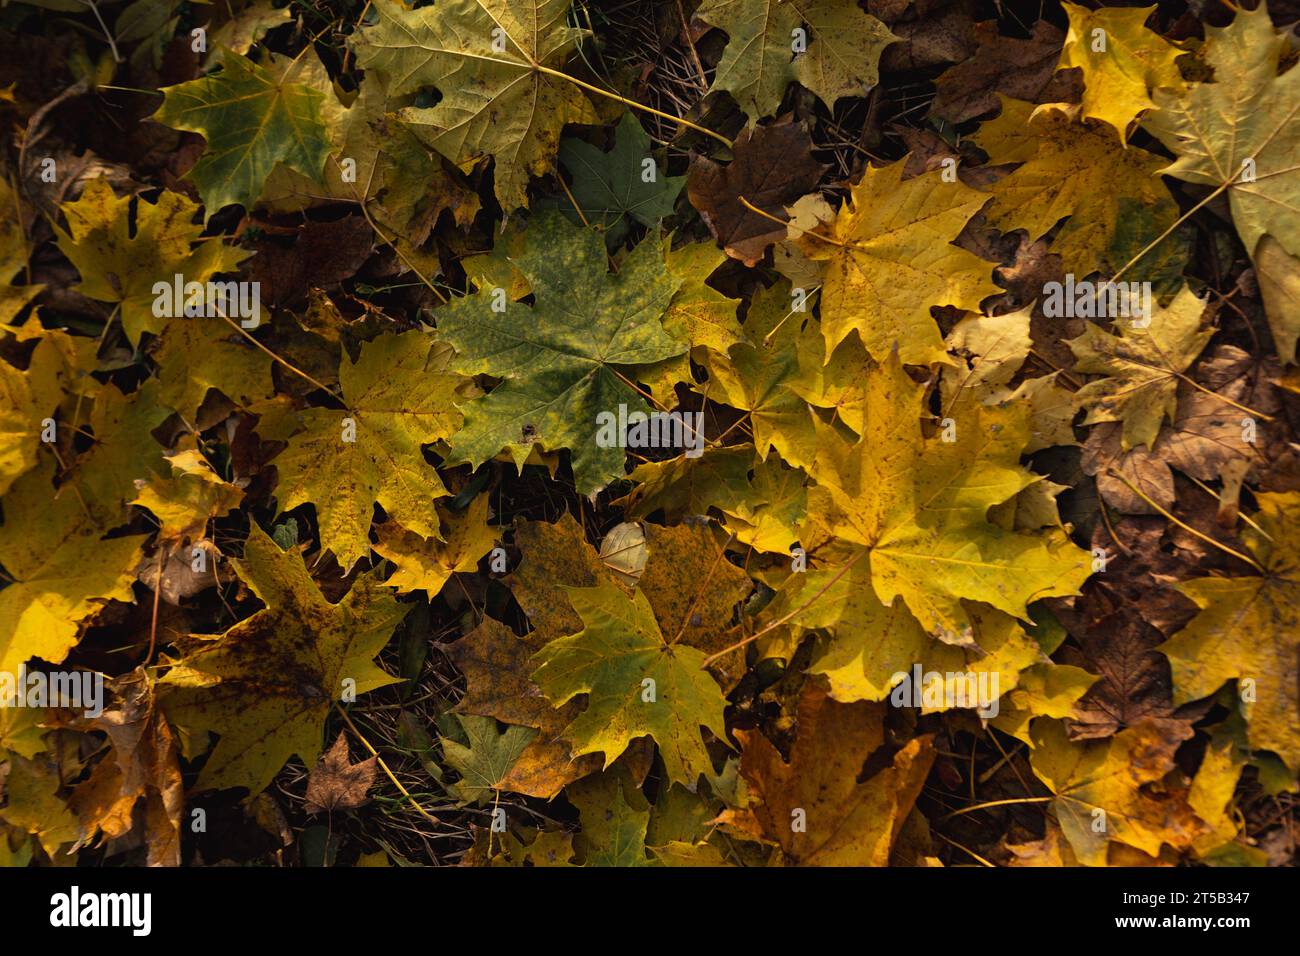 Nature background with fallen autumn yellow maple leaves Stock Photo